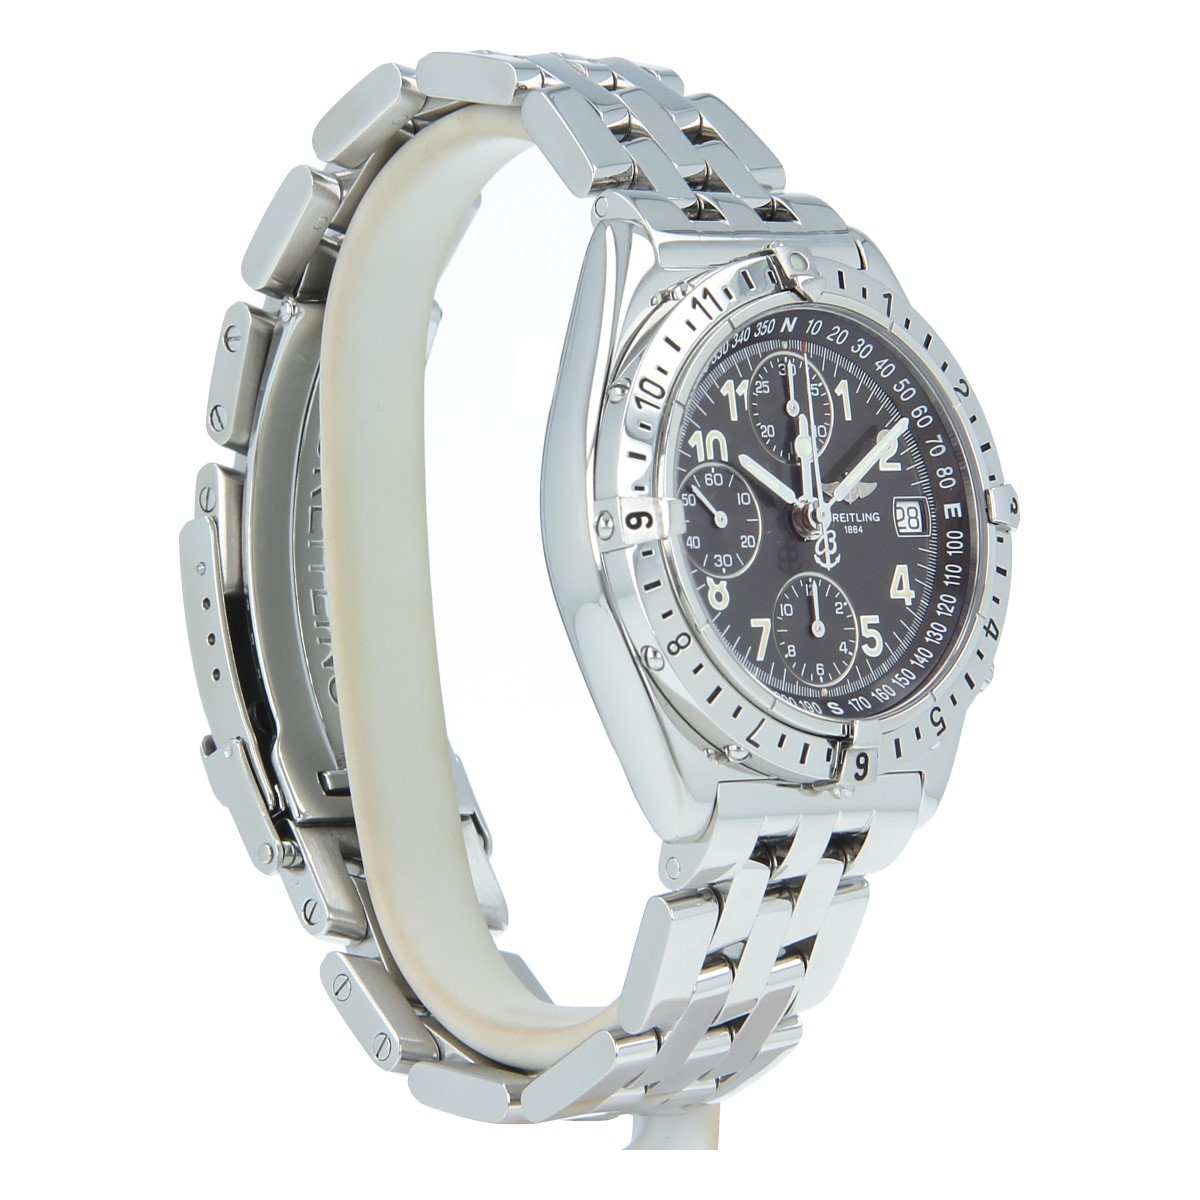 Breitling Chronomat Longitude GMT A20048 | Buy pre-owned Breitling watches